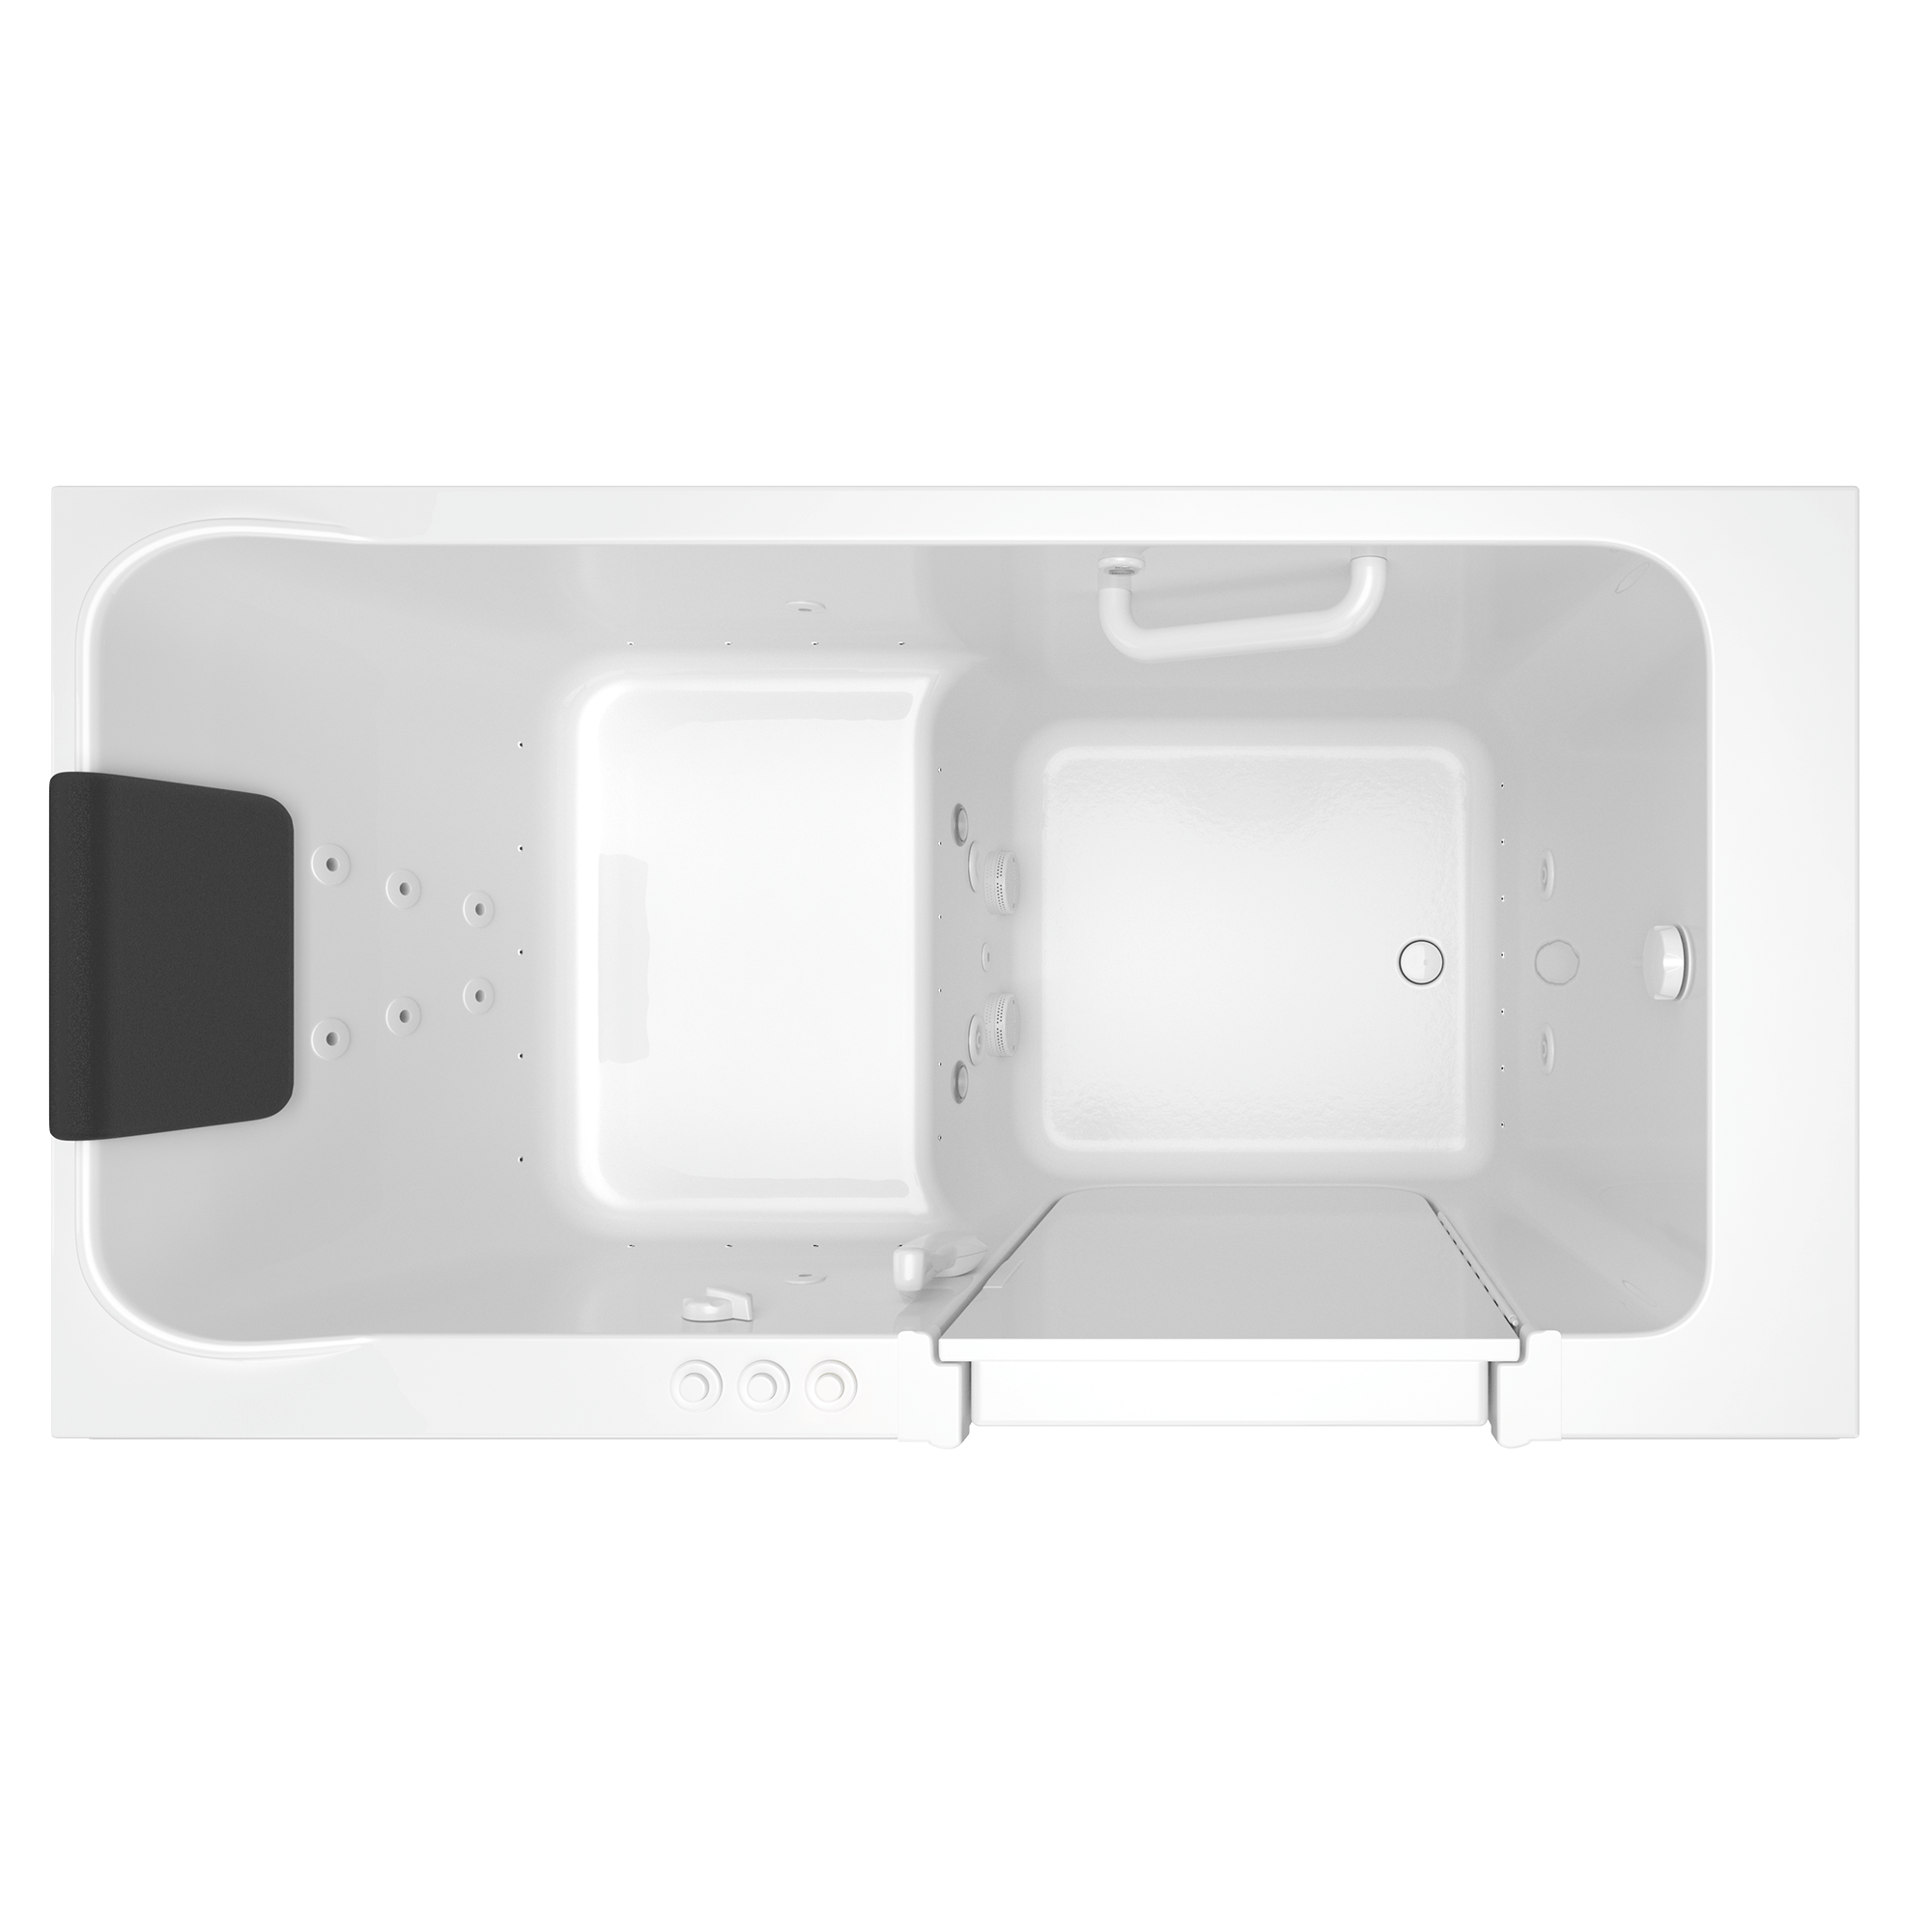 Acrylic Luxury Series 32 x 60  Inch Walk in Tub With Combination Air Spa and Whirlpool Systems   Right Hand Drain WIB WHITE